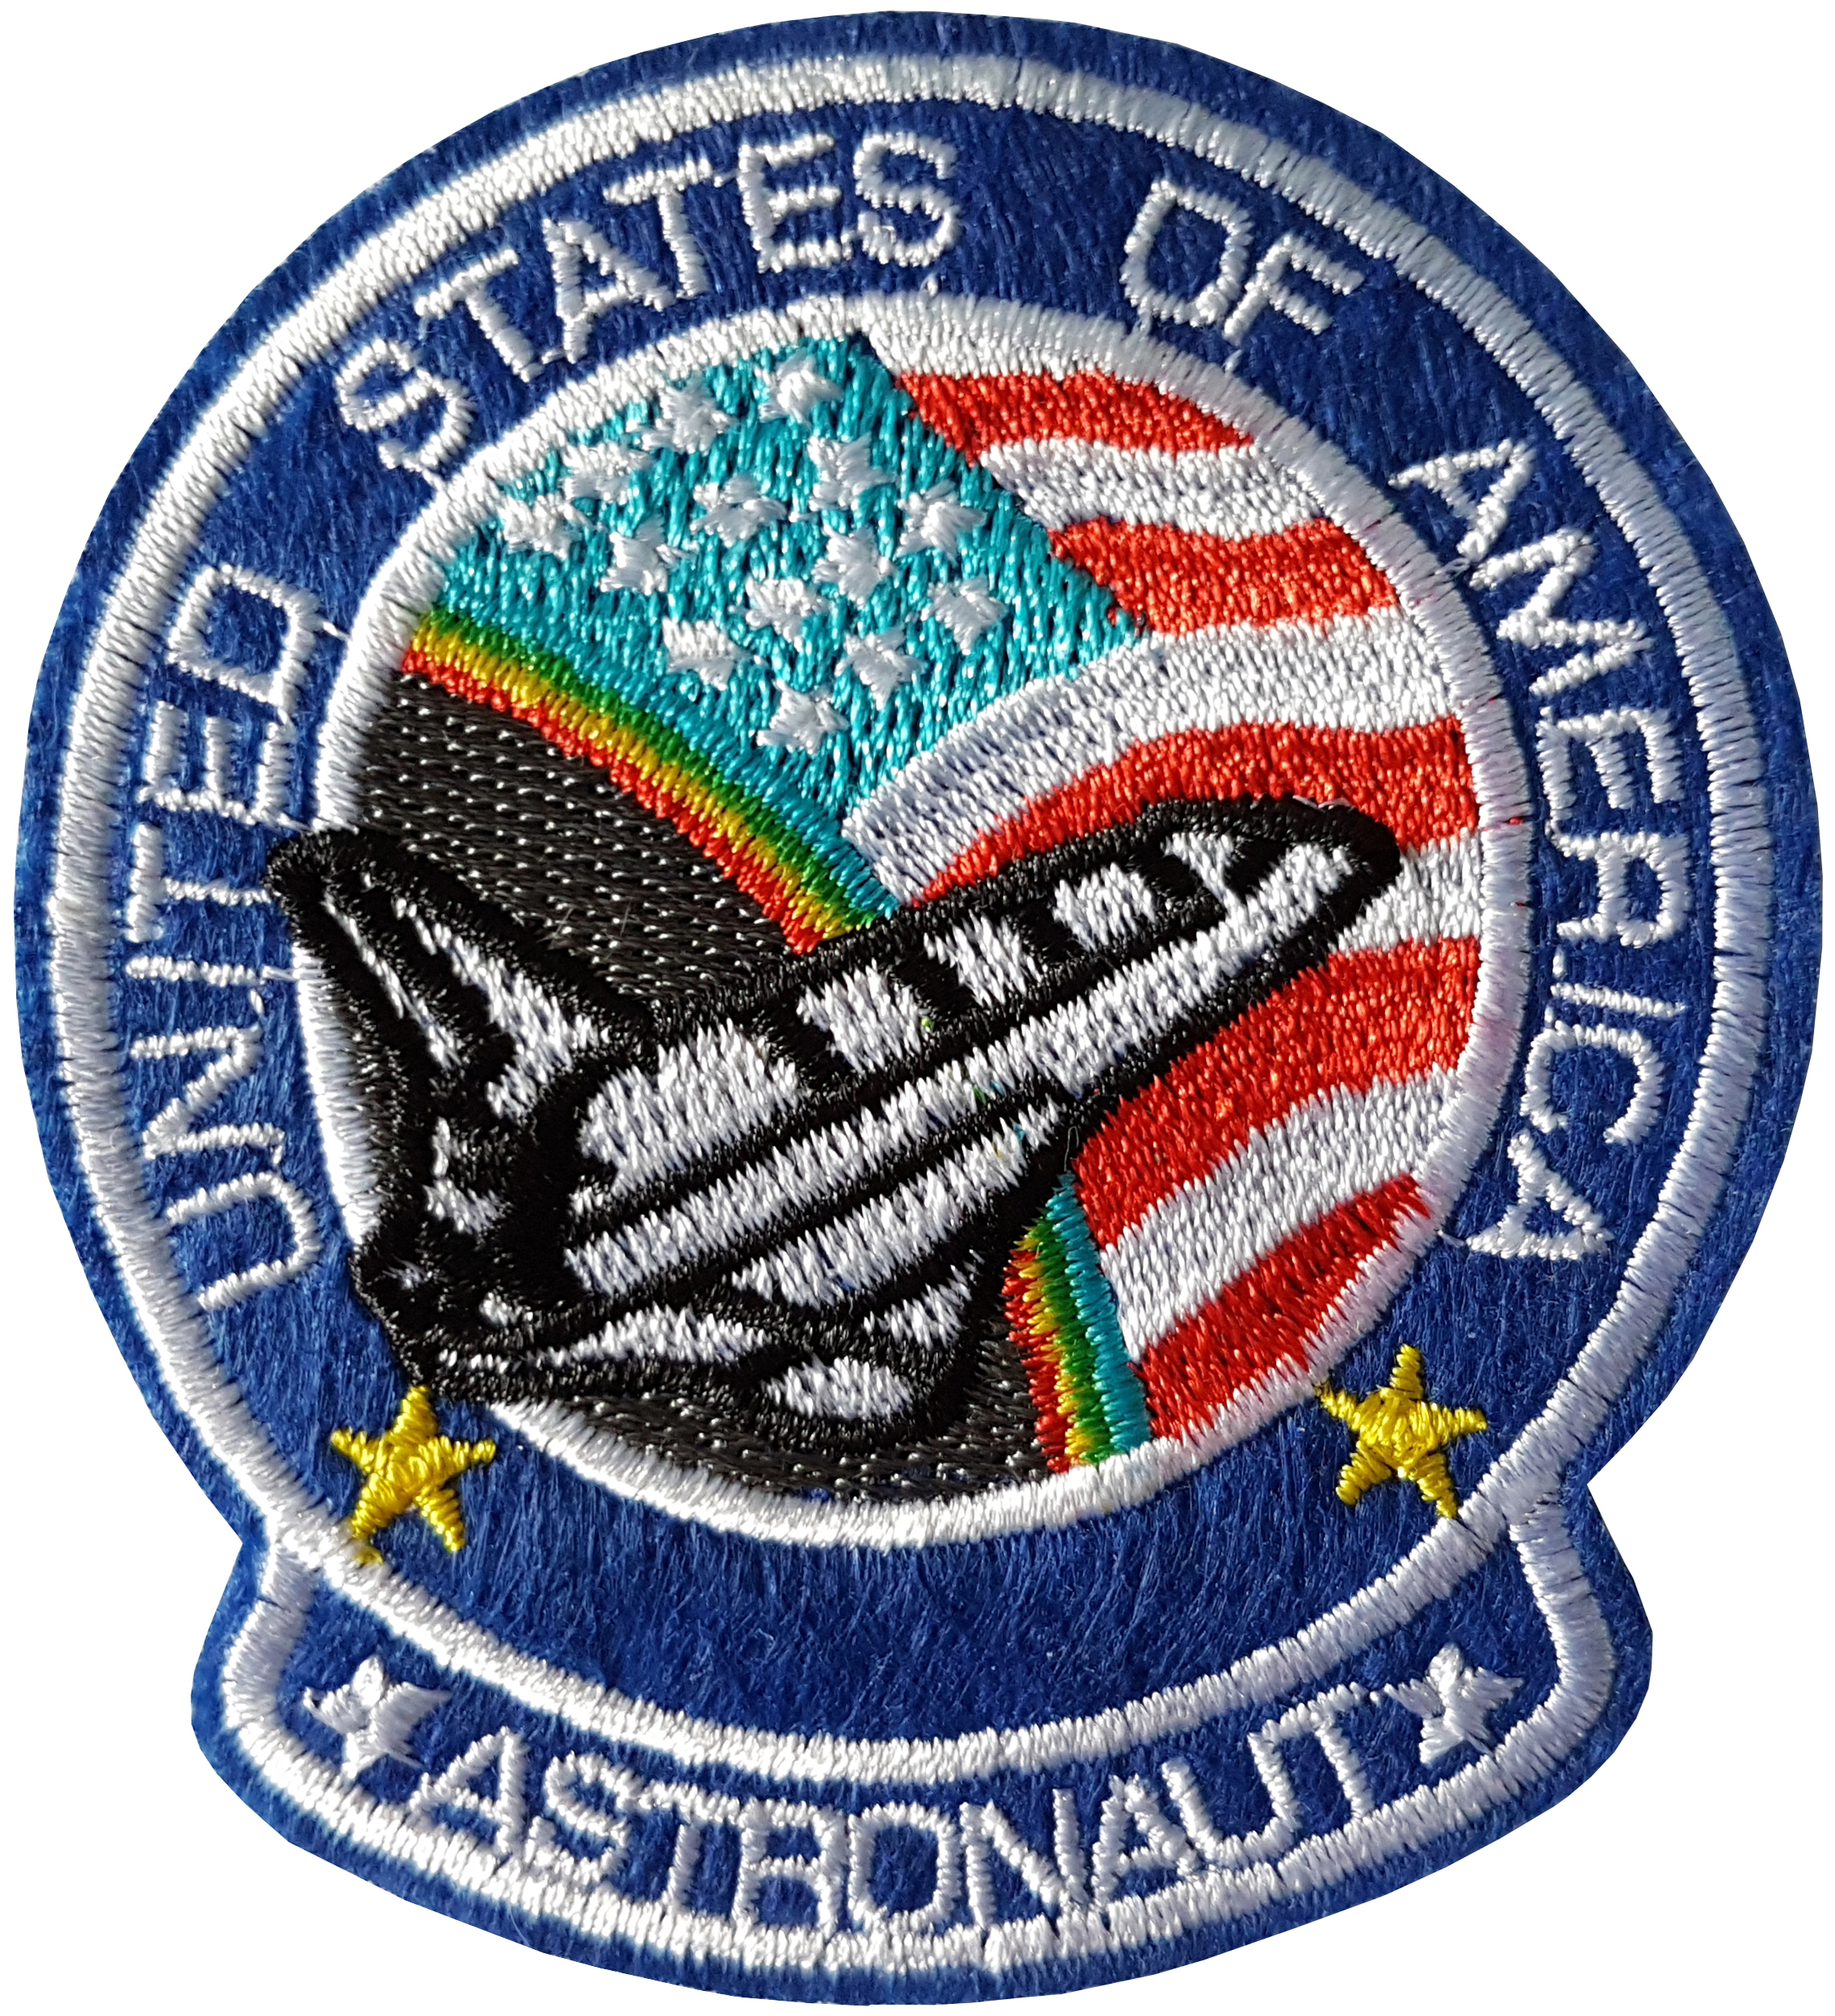 Patch Thermocollant Navette Spatiale United States of America